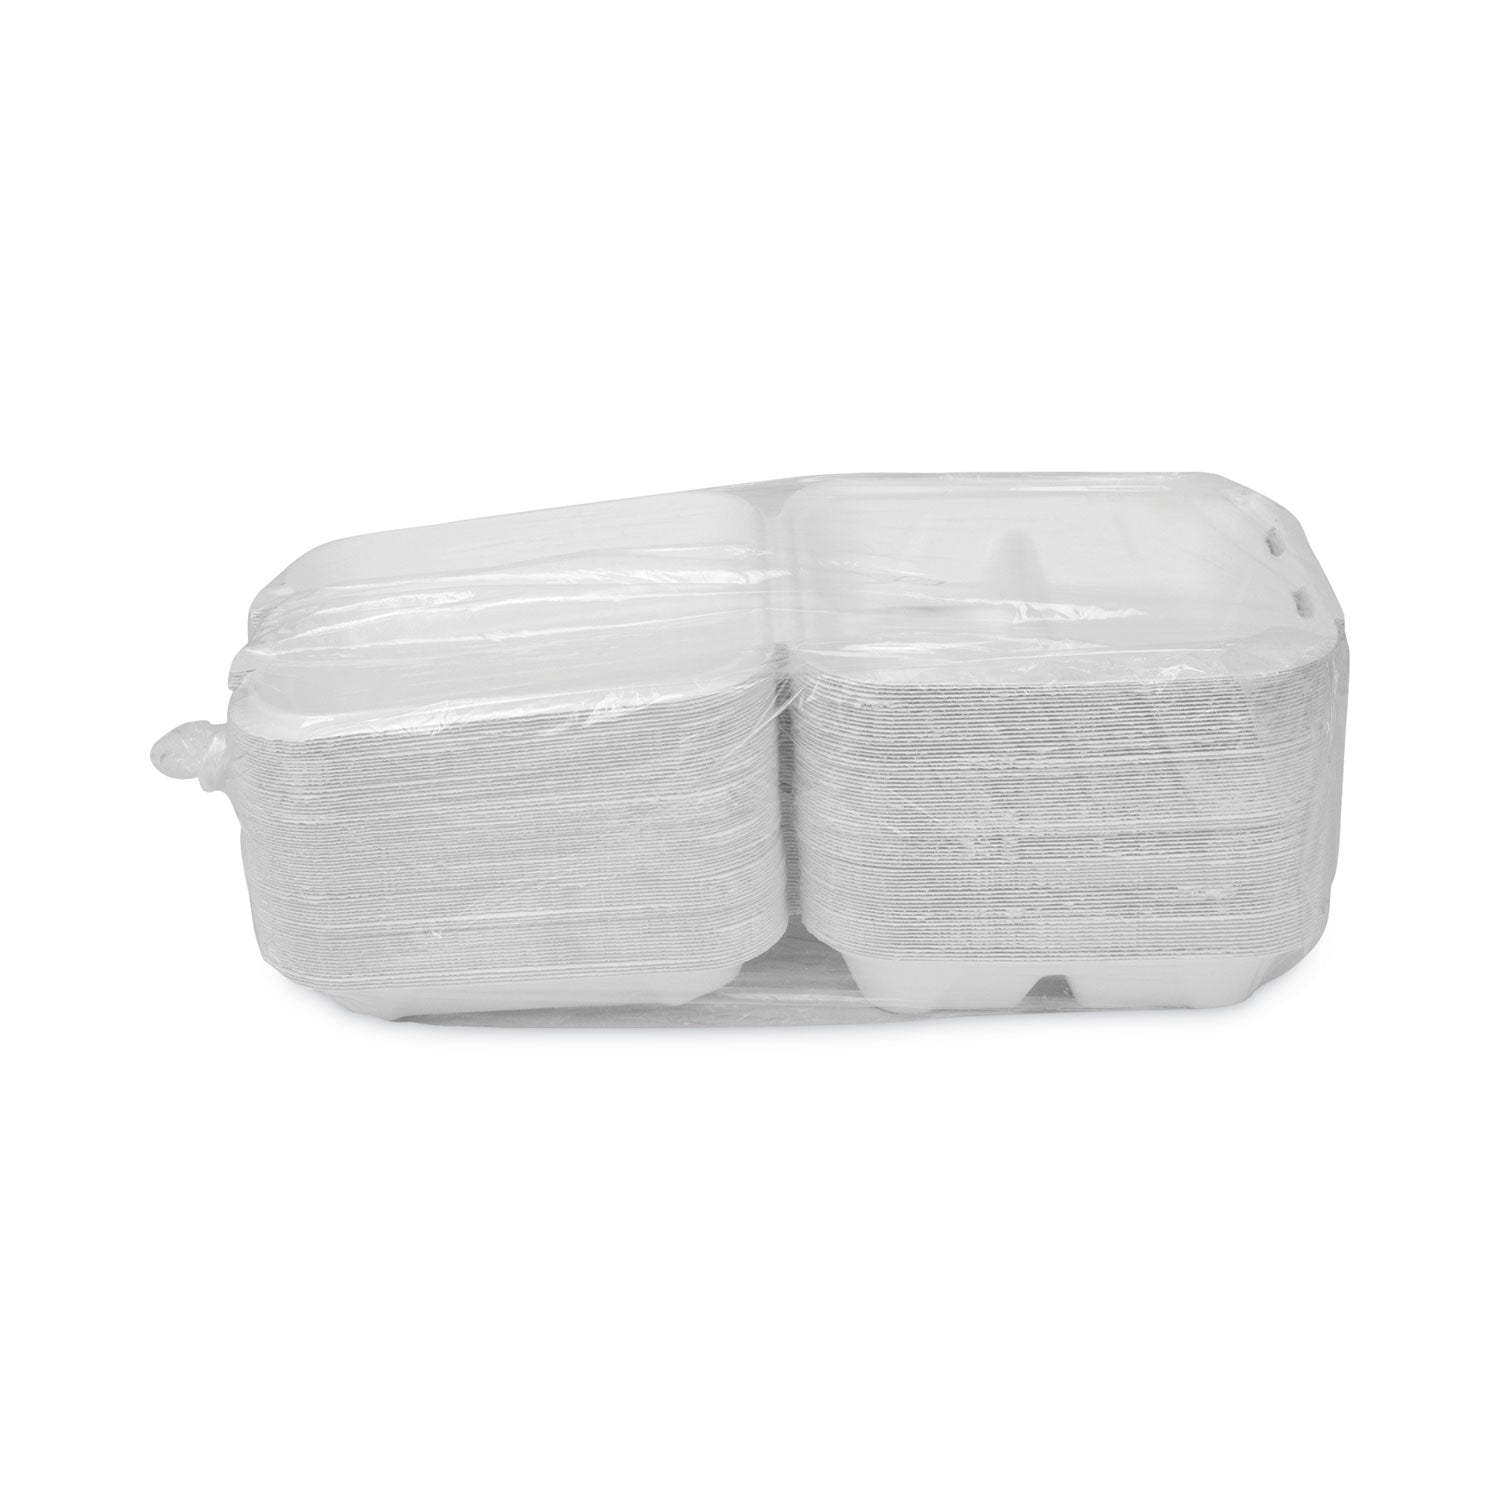 earthchoice-bagasse-hinged-lid-container-3-compartment-dual-tab-lock-78-x-78-x-28-natural-sugarcane-150-carton_pctymch08030001 - 3